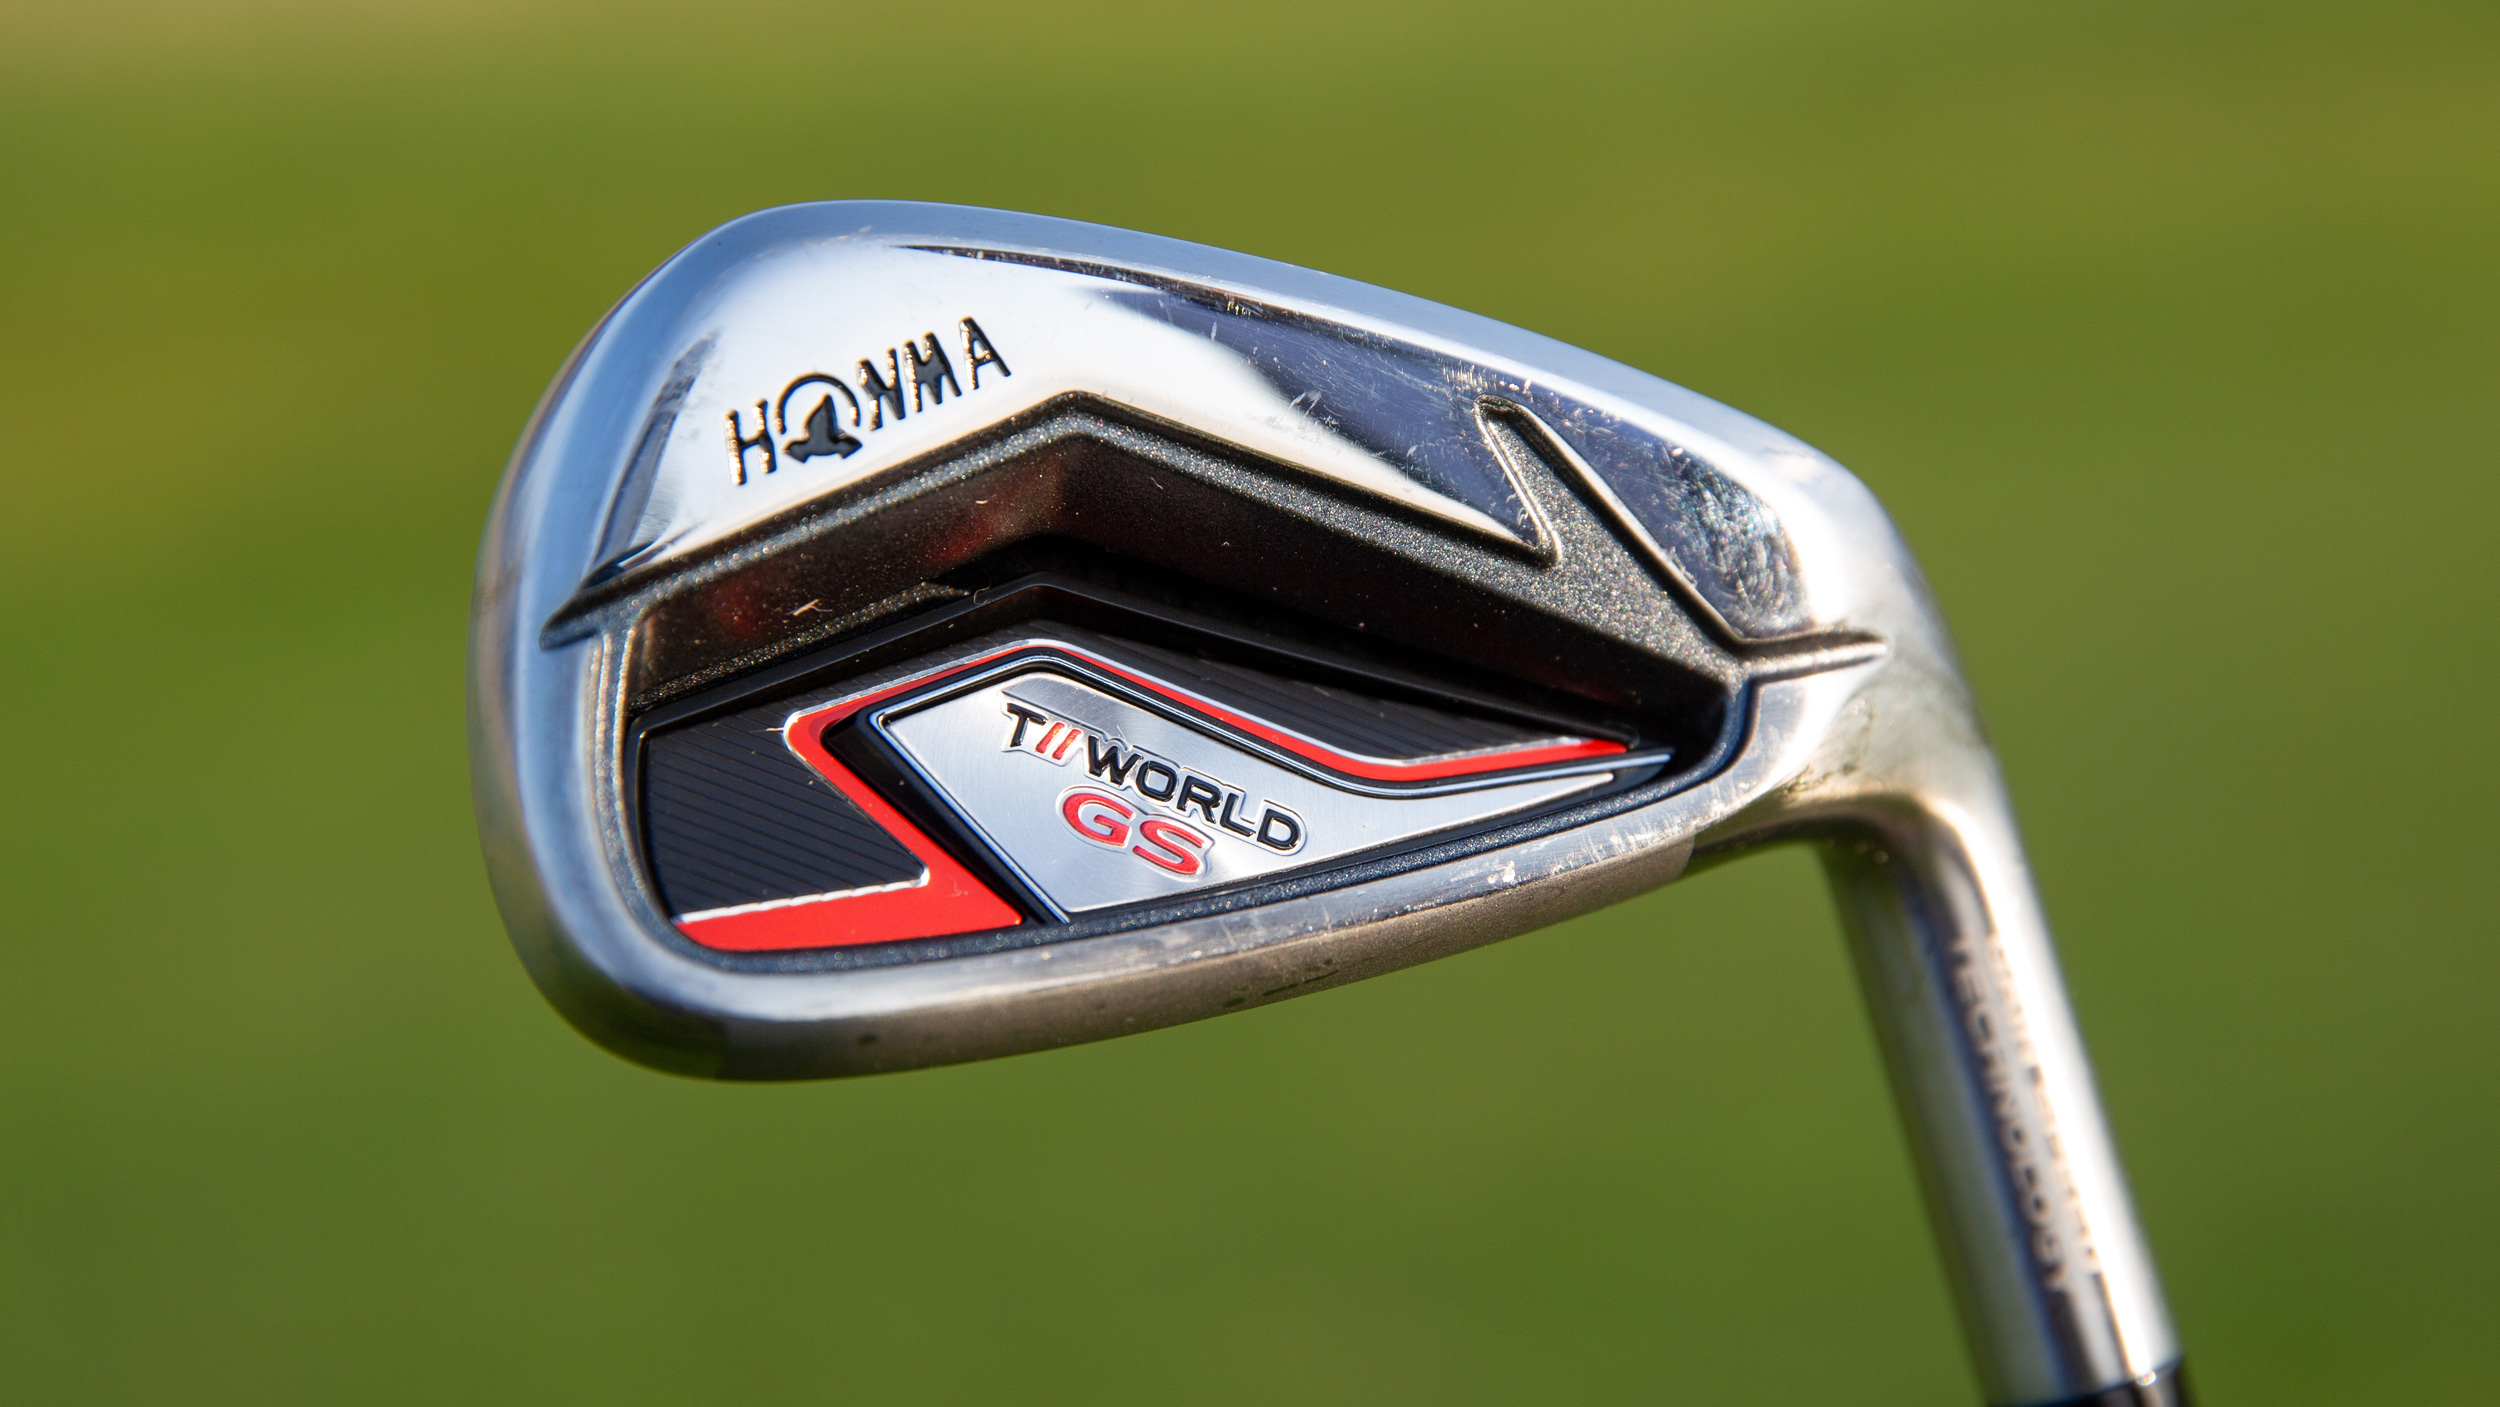 Honma T//World GS Irons Review | Golf Monthly